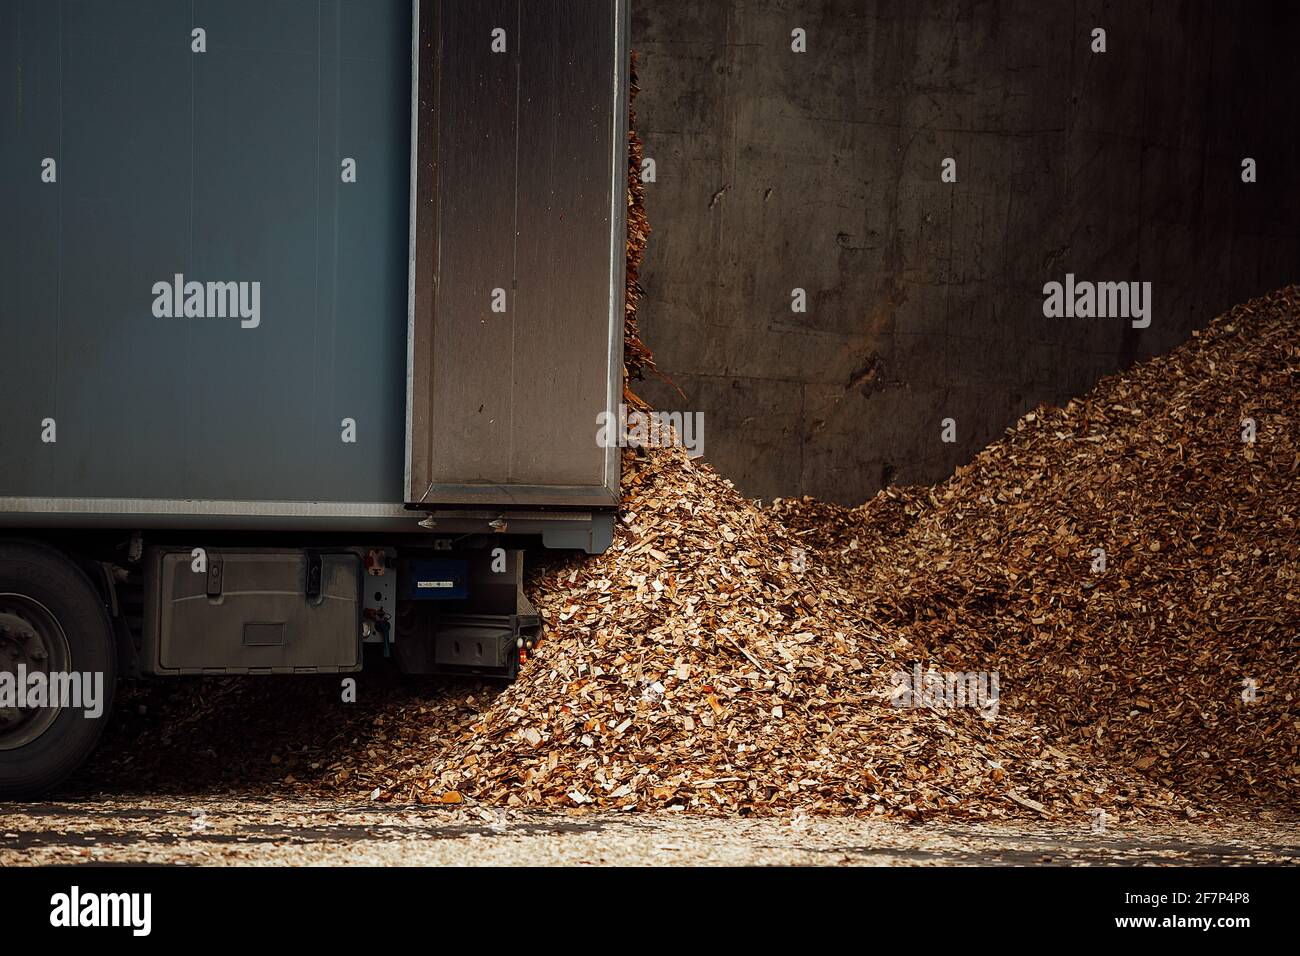 the truck unloads tons of wood waste. sawdust and shavings are stored for further processing. mountain of waste wood Stock Photo